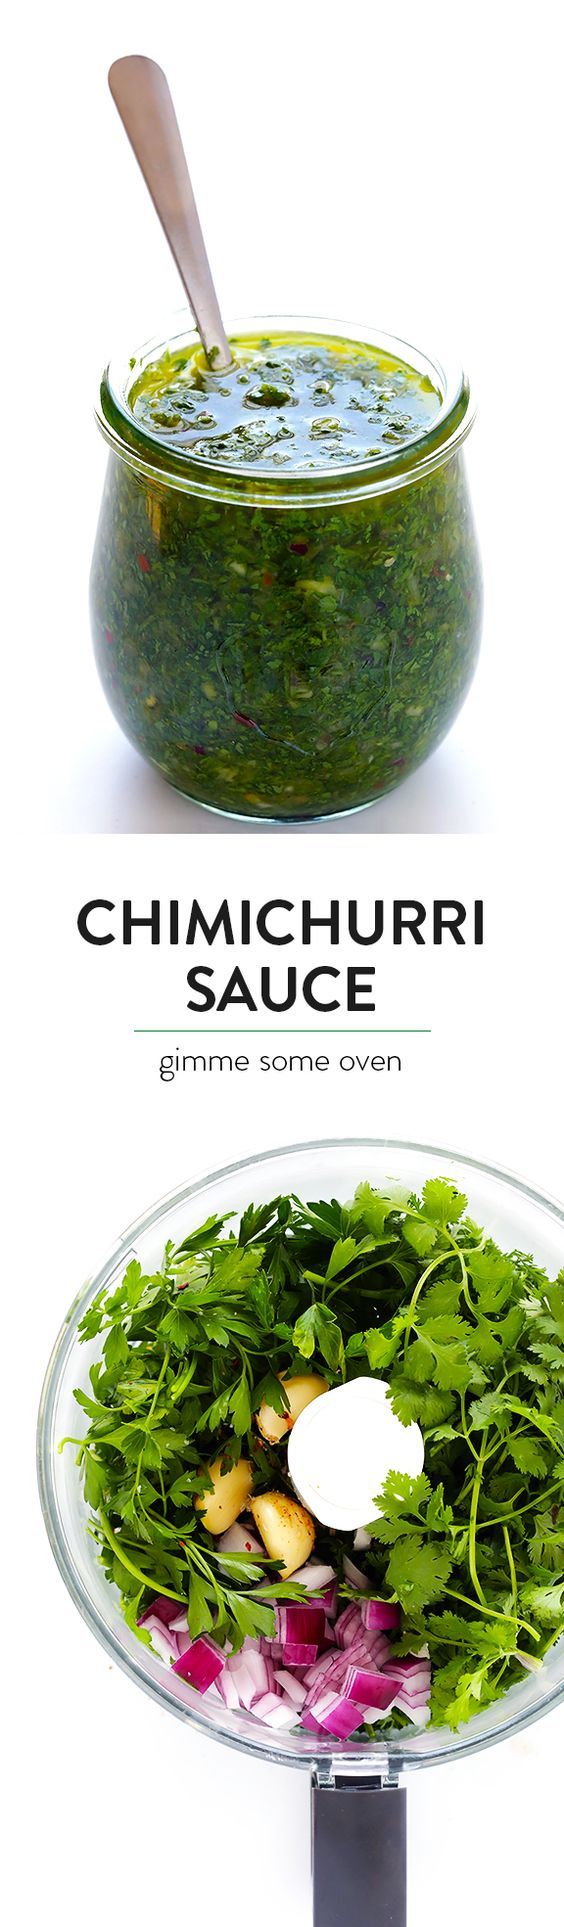 Chimichurri Sauce - Easy to make in the food processor or blender, and it's full of easy, fresh, and delicious ingredients, and it's perfect for topping seafood, steak, veggies, or whatever sounds good.